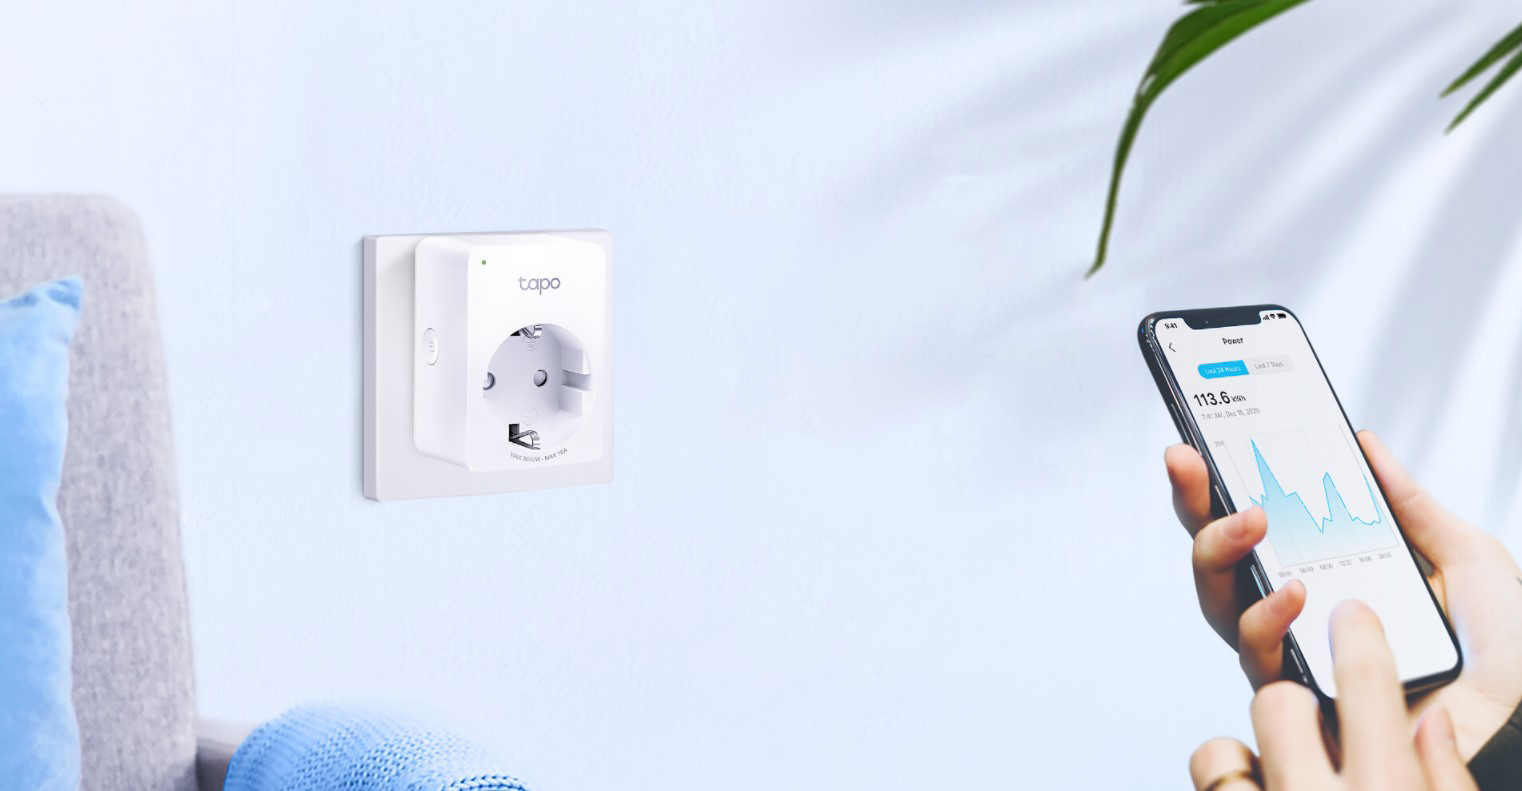 TP-Link launches new smart home accessory to control consumption